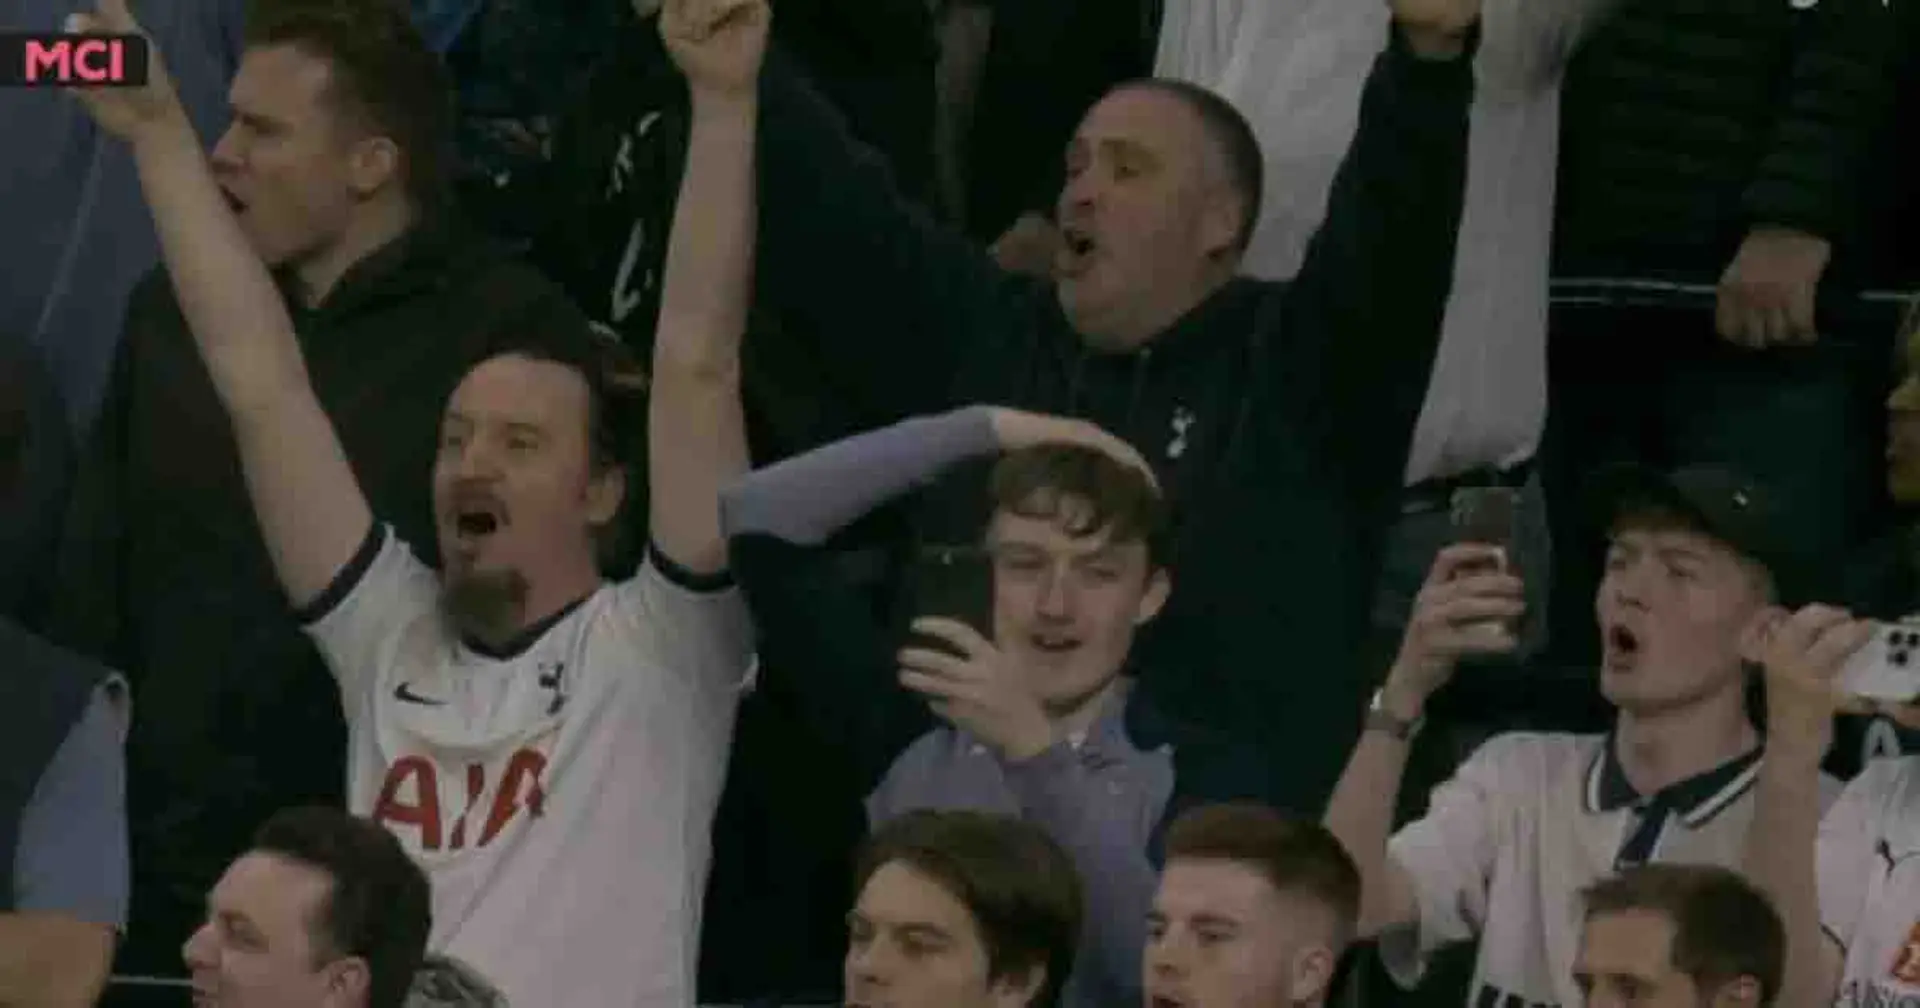 Tottenham fans do Poznan celebration, aim disgusting chants at Arsenal after CONCEDING against Man City